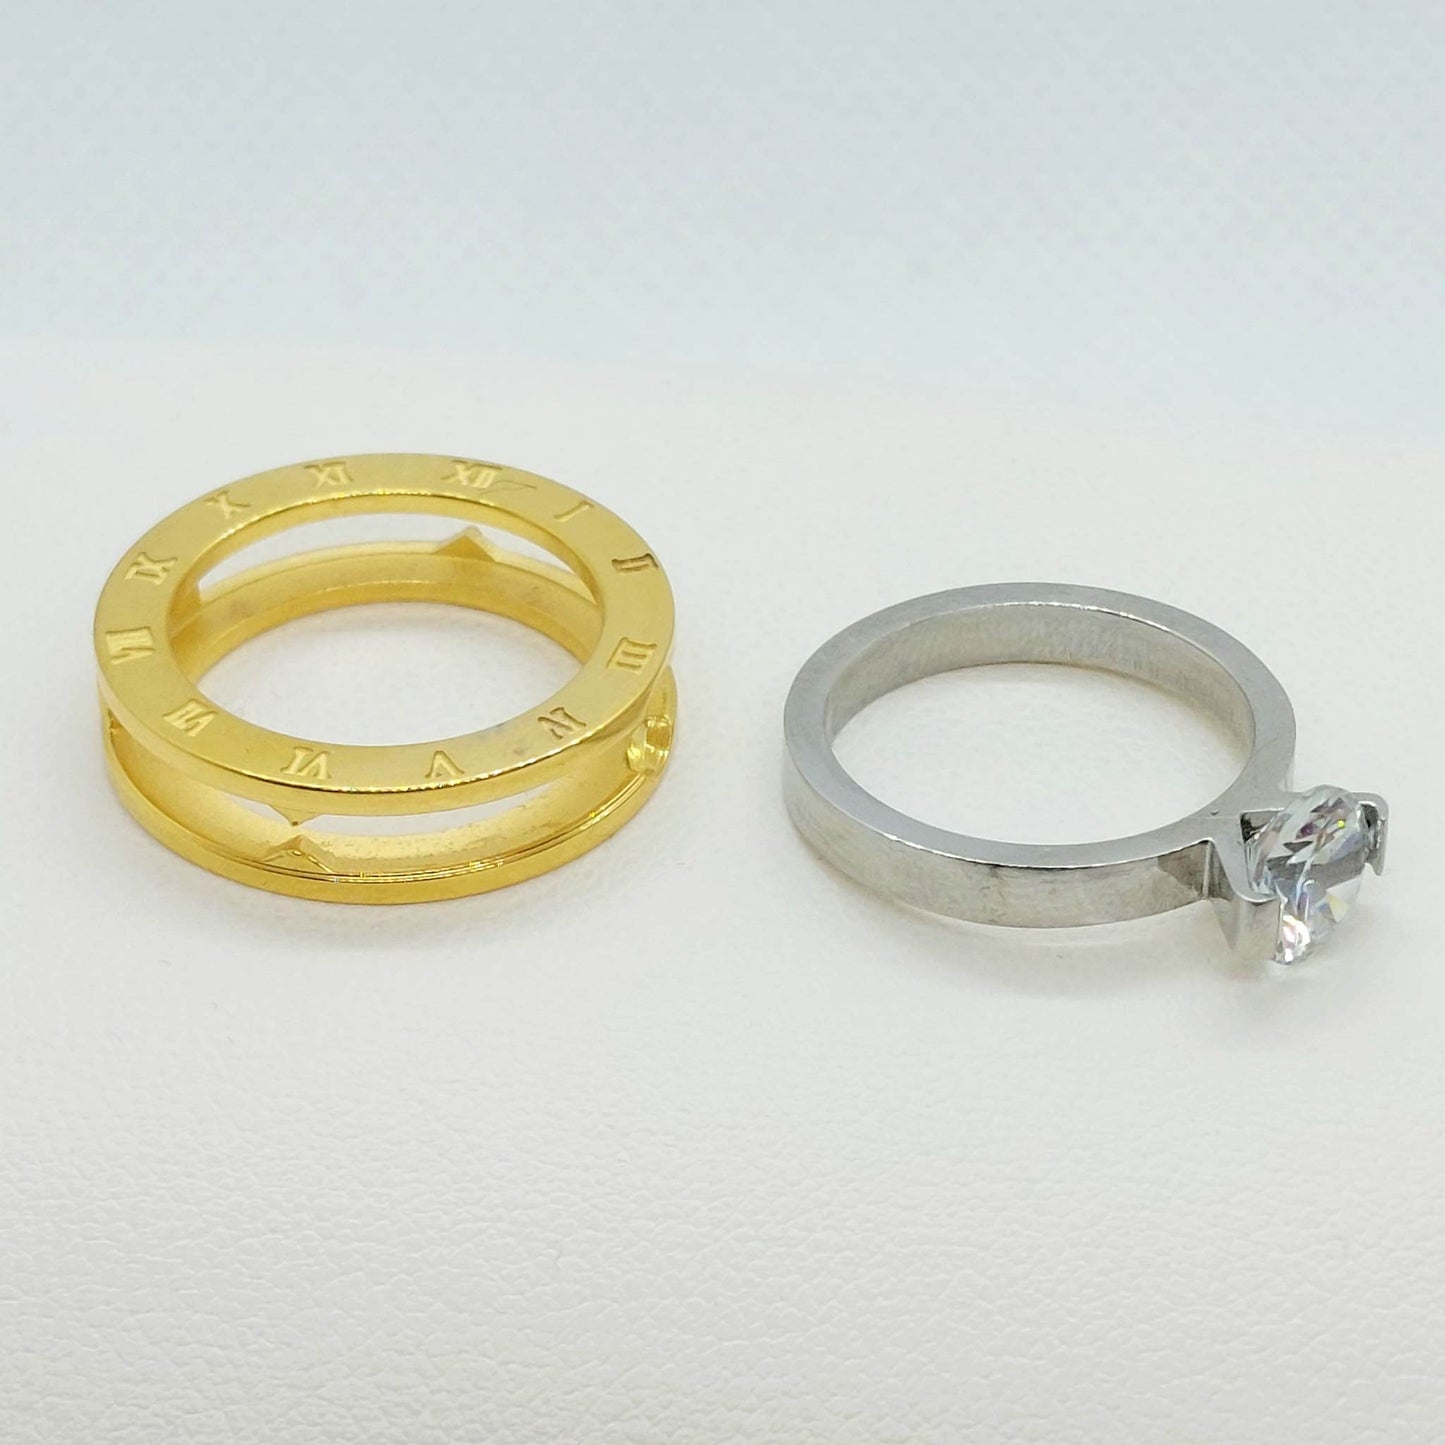 Two-in-one Zircon Ring in Stainless Steel